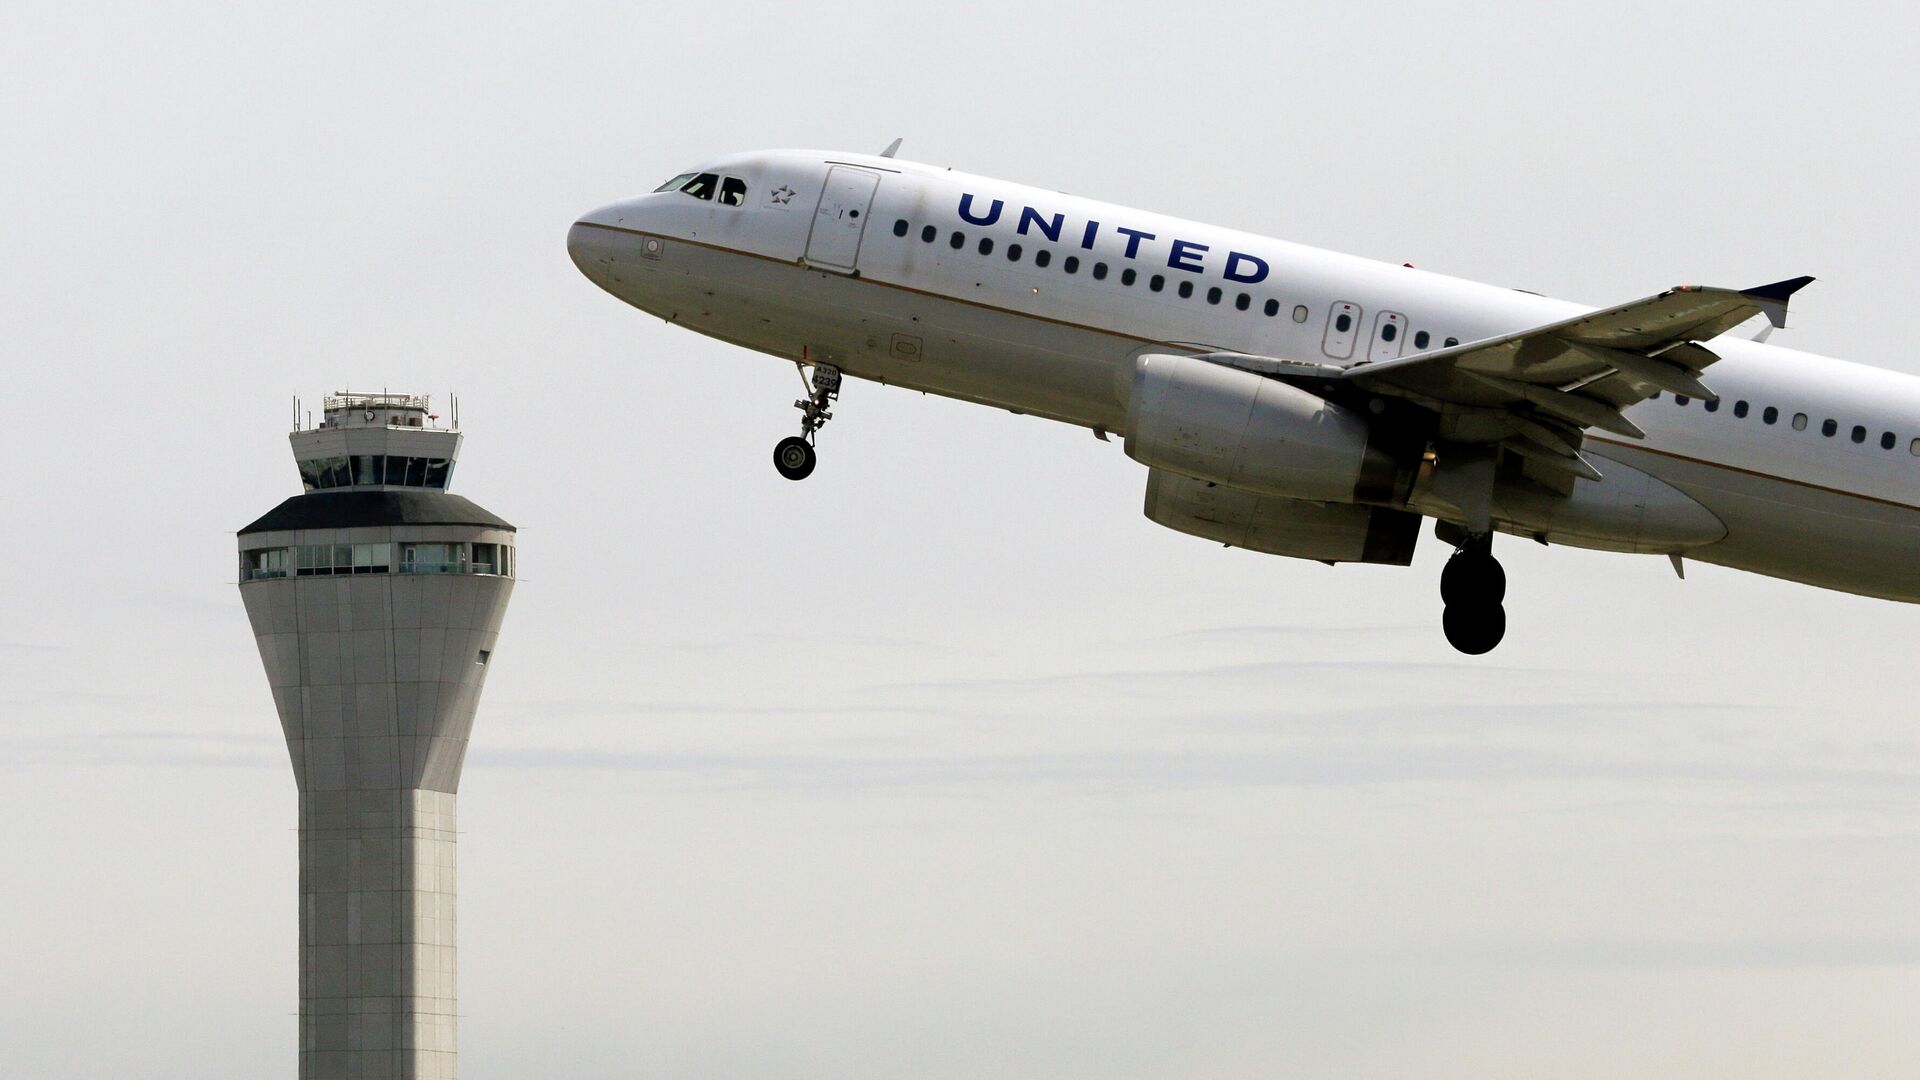 FILE - In this April 23, 2013 file photo, a United Airlines jet departs in view of the air traffic control tower at Seattle-Tacoma International Airport in Seattle - Sputnik International, 1920, 18.01.2022